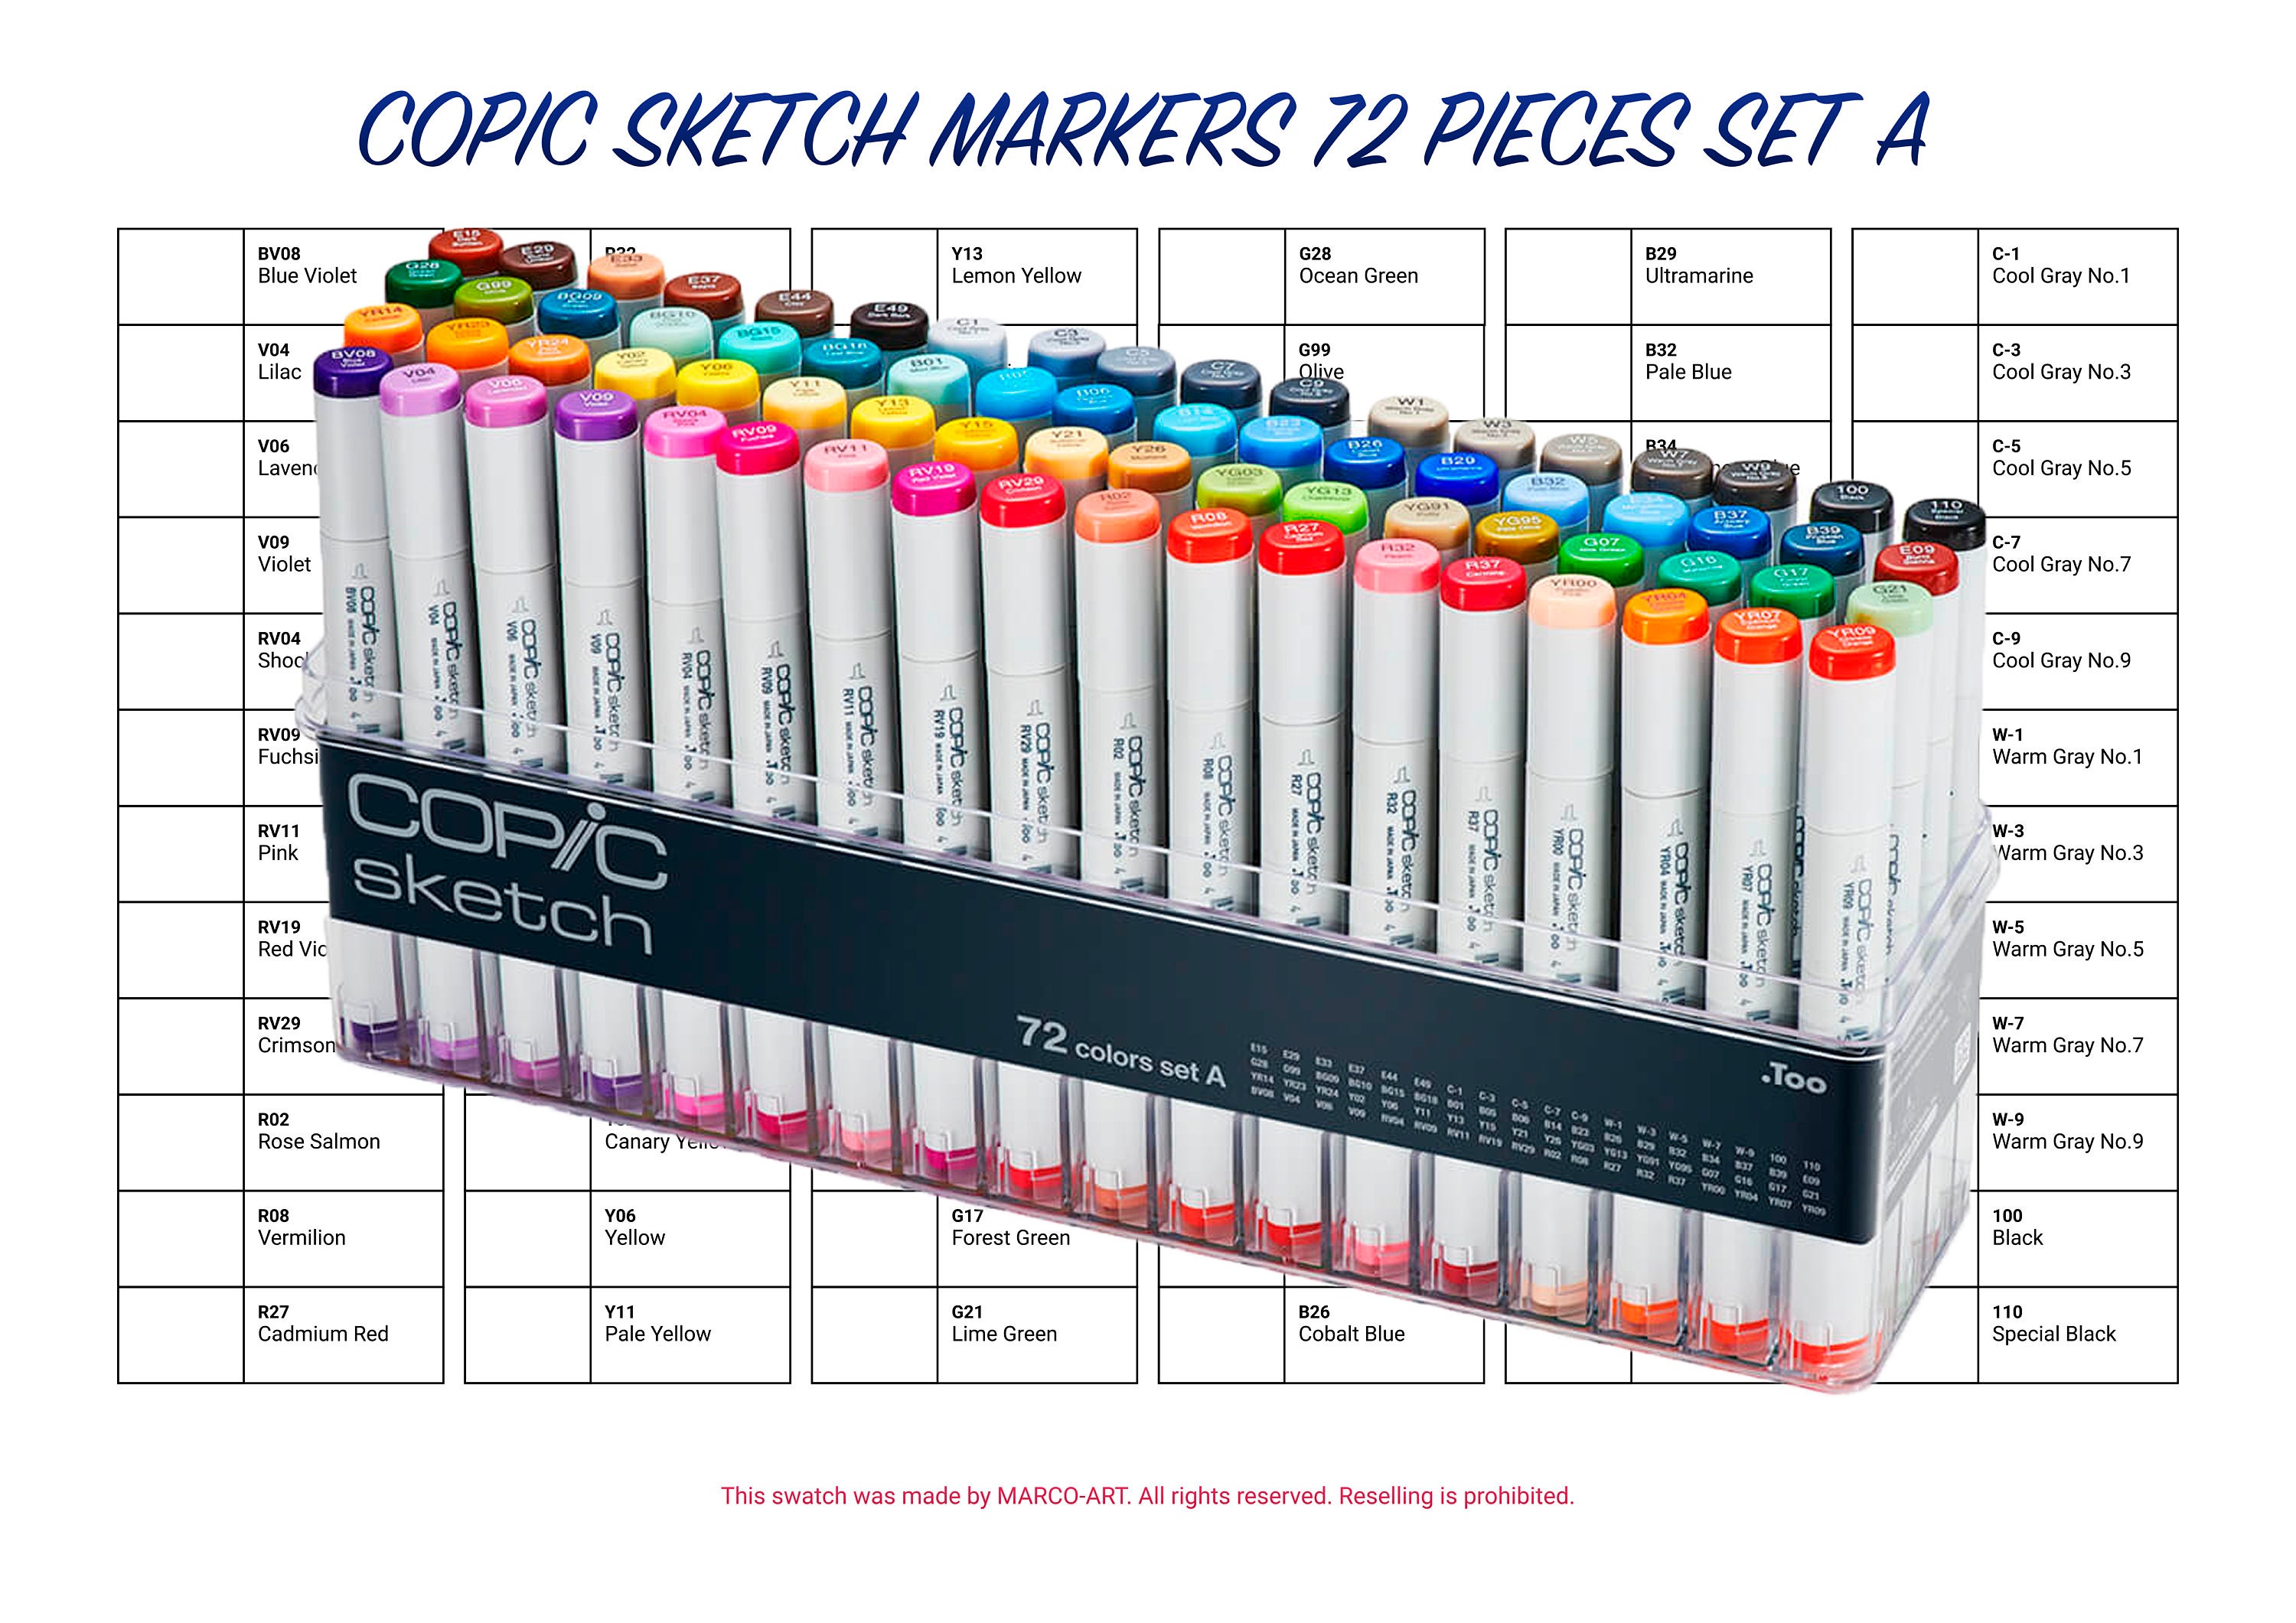 Caliart Markers 72 Gift Pack – CraftWork Studios